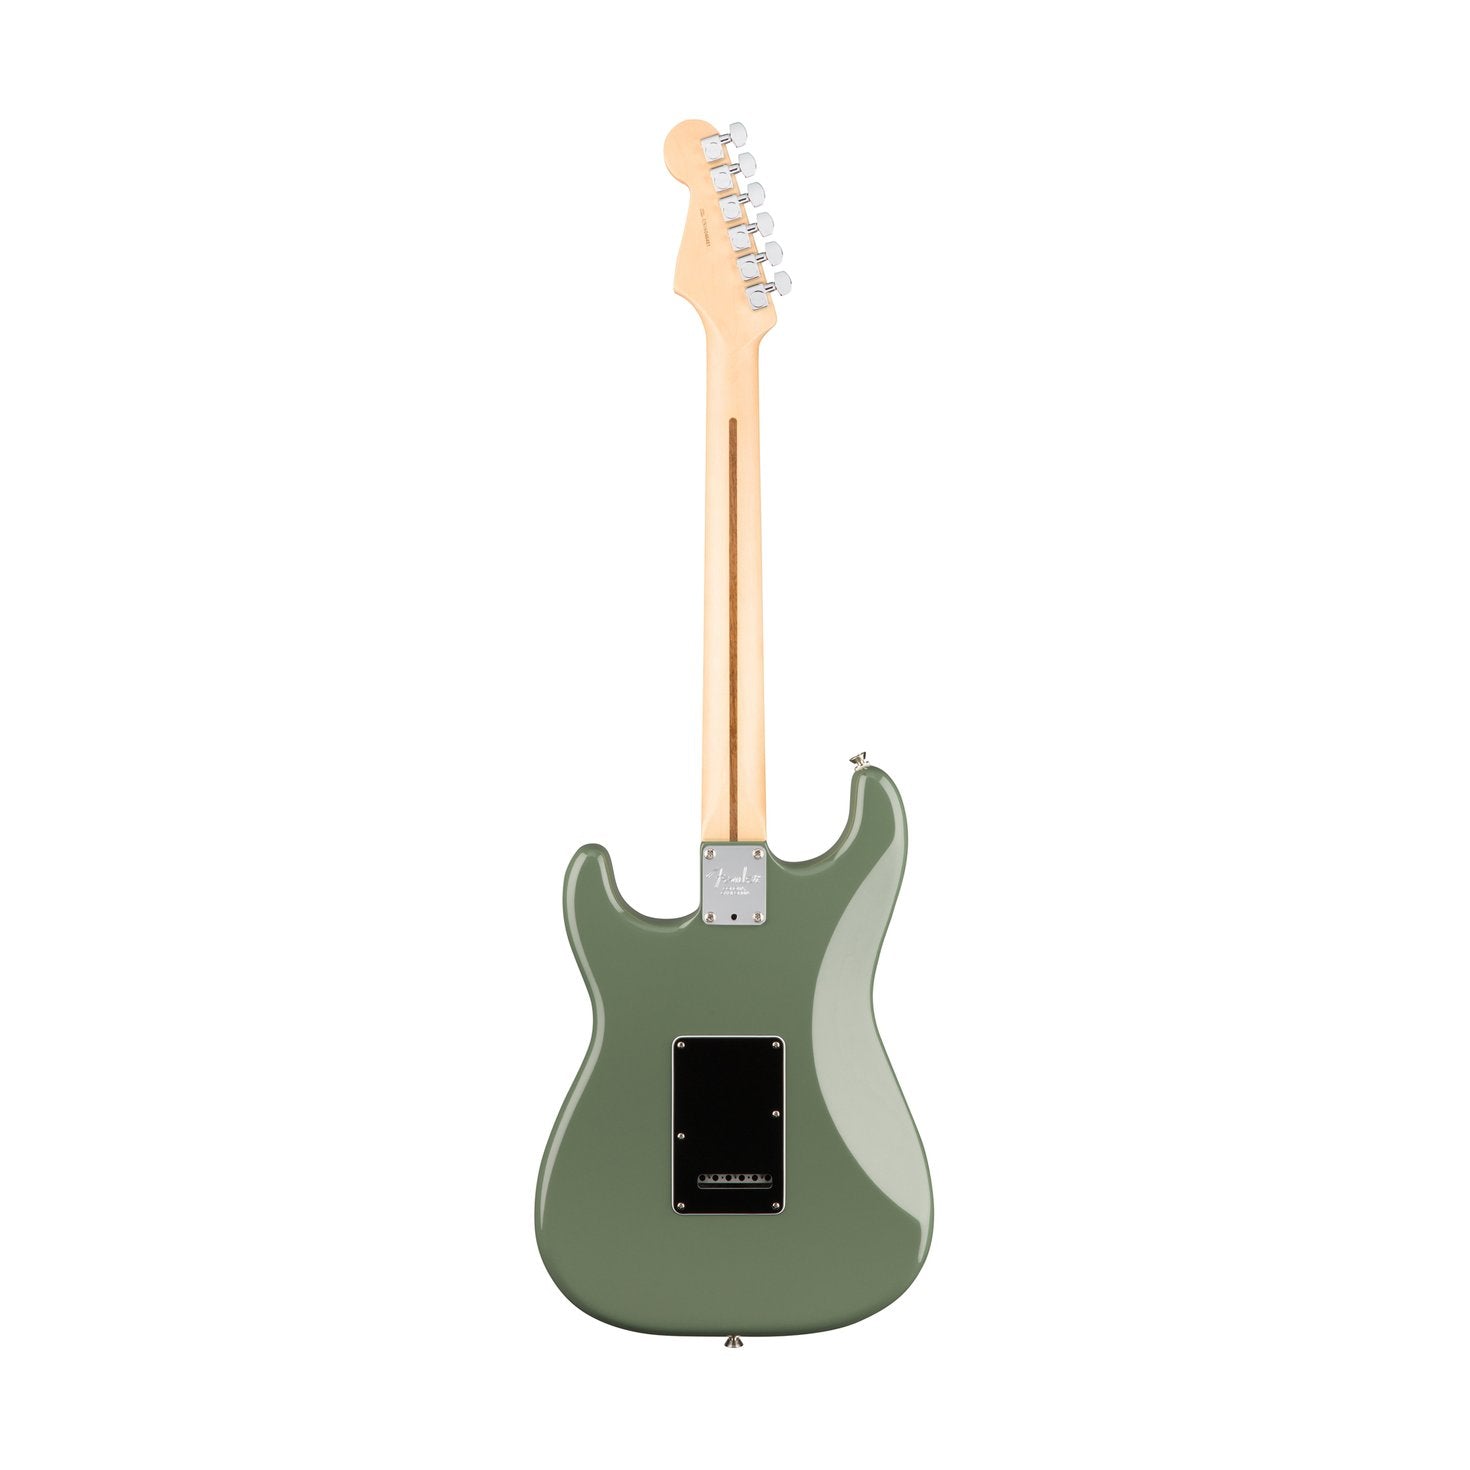 Fender American Professional Stratocaster Electric Guitar, Rosewood FB, Antique Olive, FENDER, ELECTRIC GUITAR, fender-electric-guitar-f03-011-3010-776, ZOSO MUSIC SDN BHD